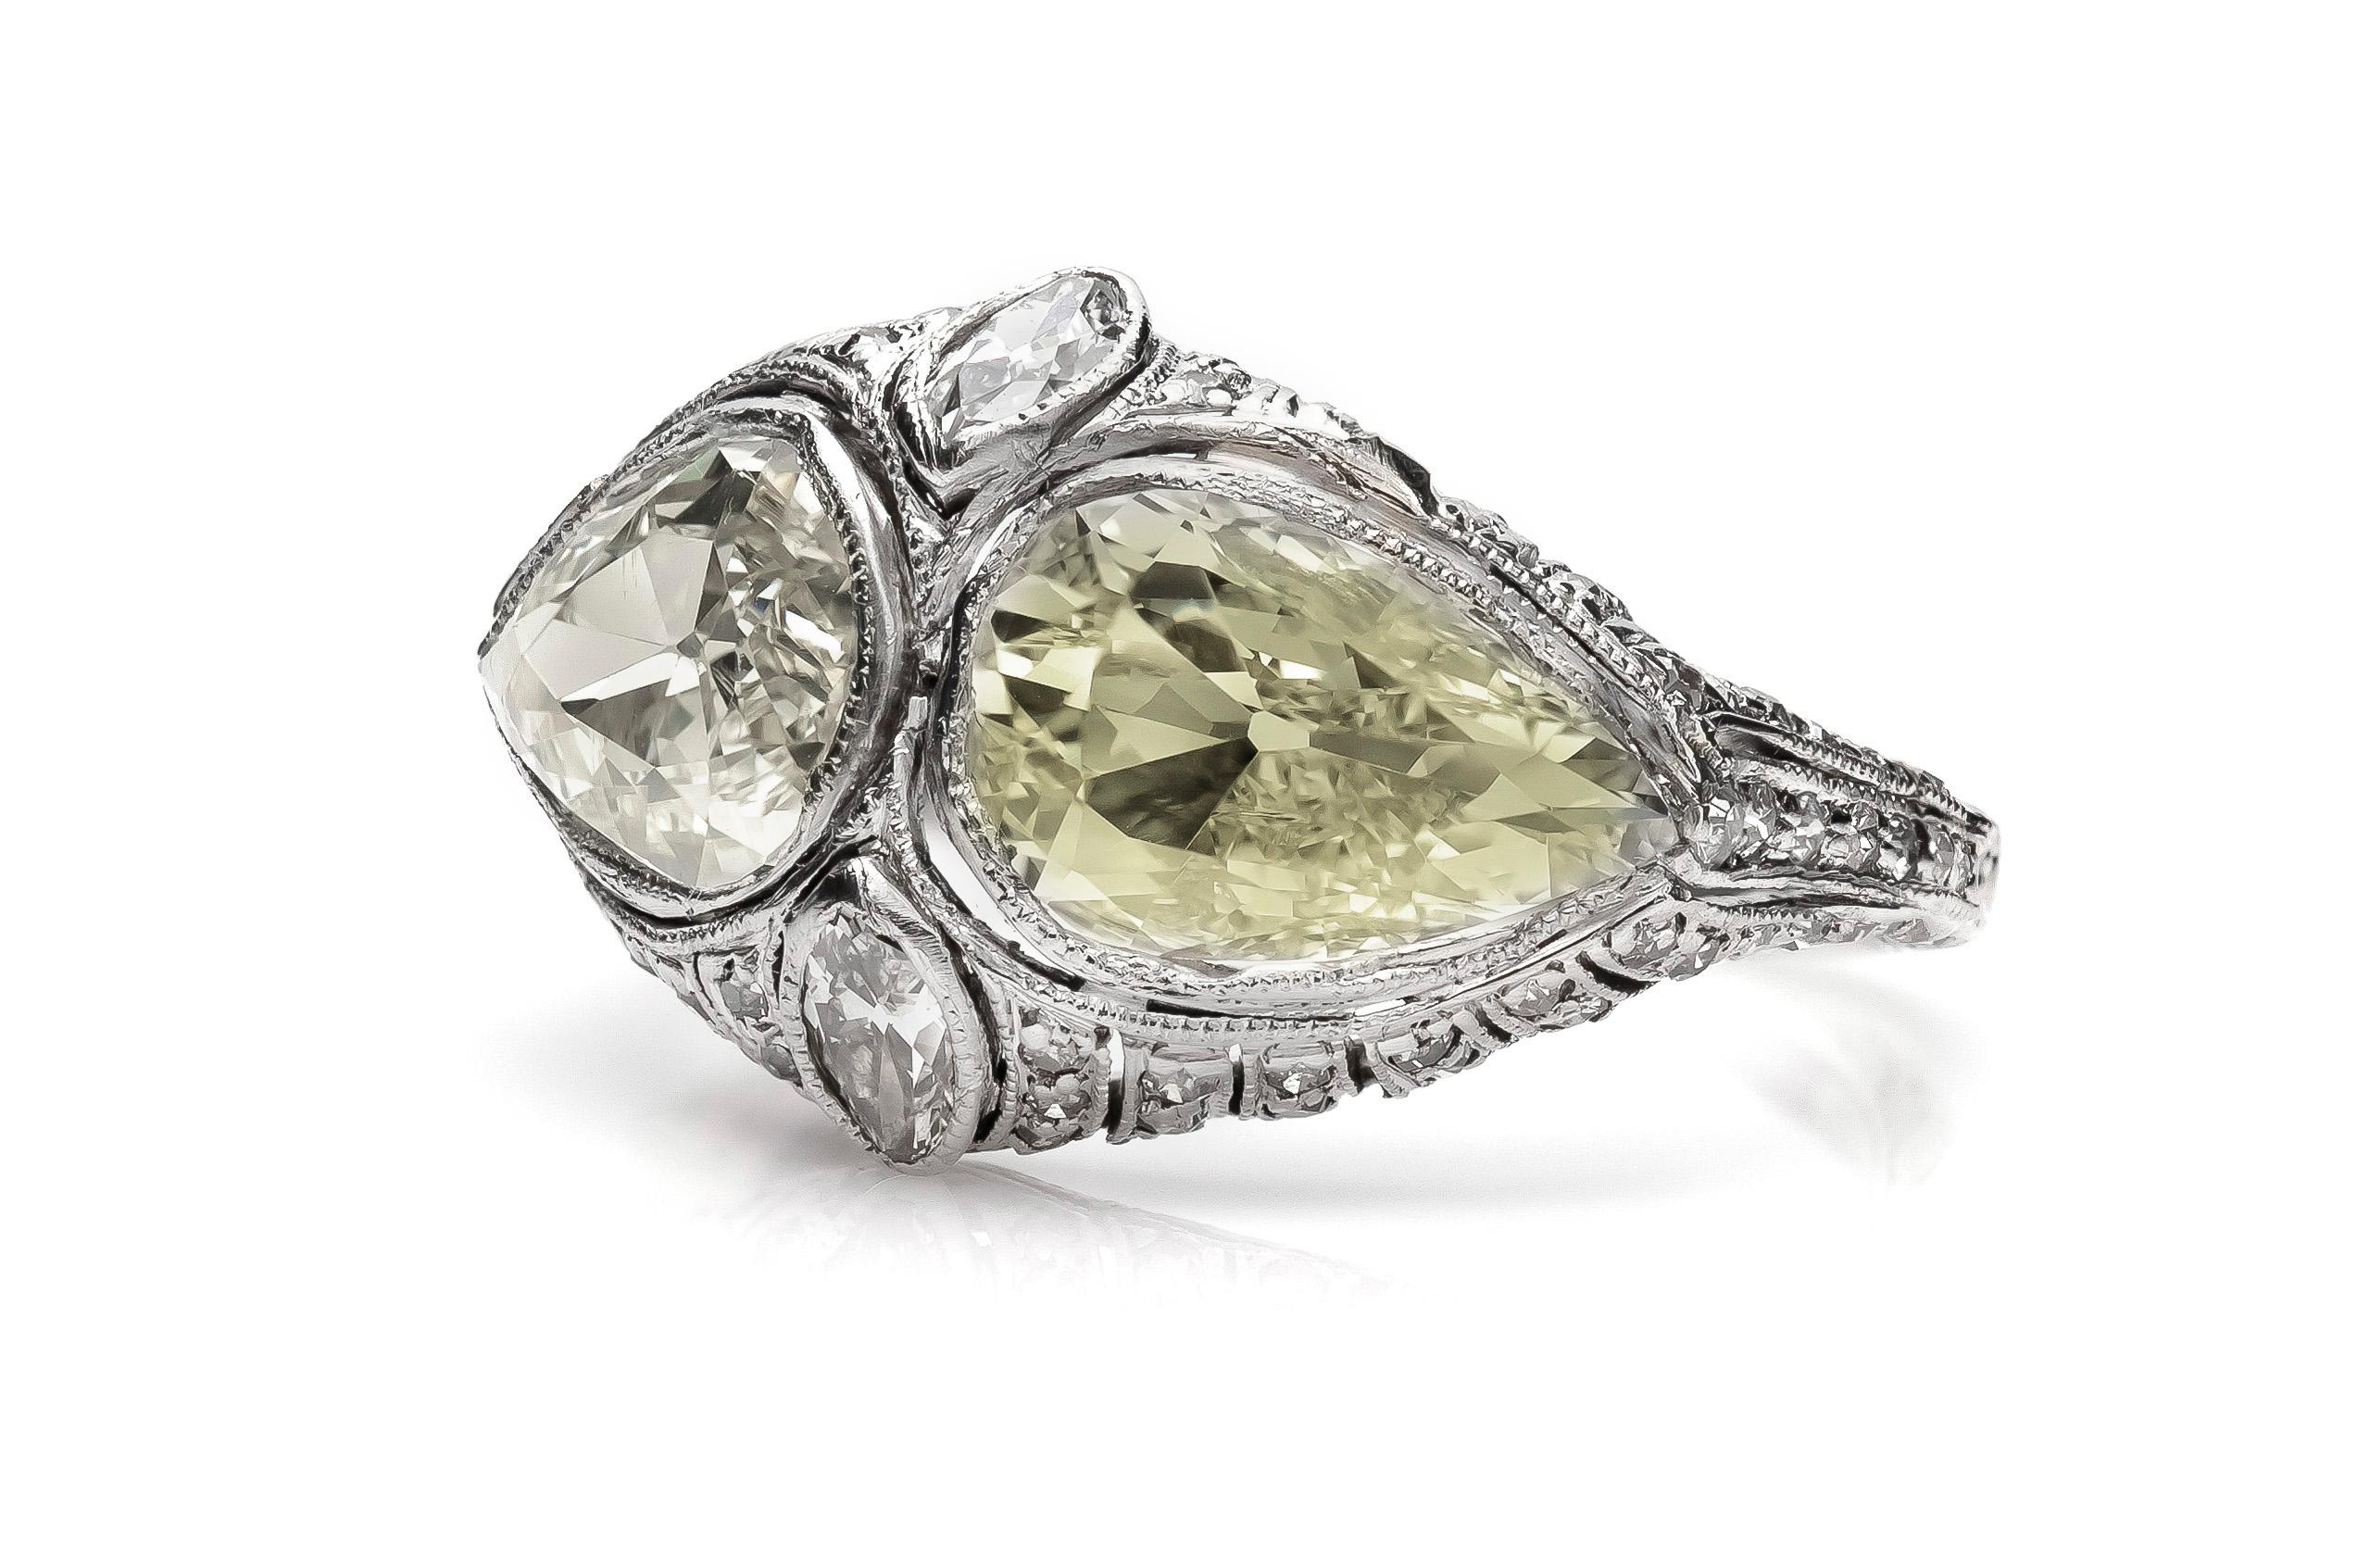 Finely crafted in platinum with two Pear Shaped center diamonds weighing approximately a total of 2.65 carats.
One diamond is Fancy Yellow color, VS2 clatiy, and the other is Light Fancy Yellow color, SI2 clarity.
The setting features two Marquise